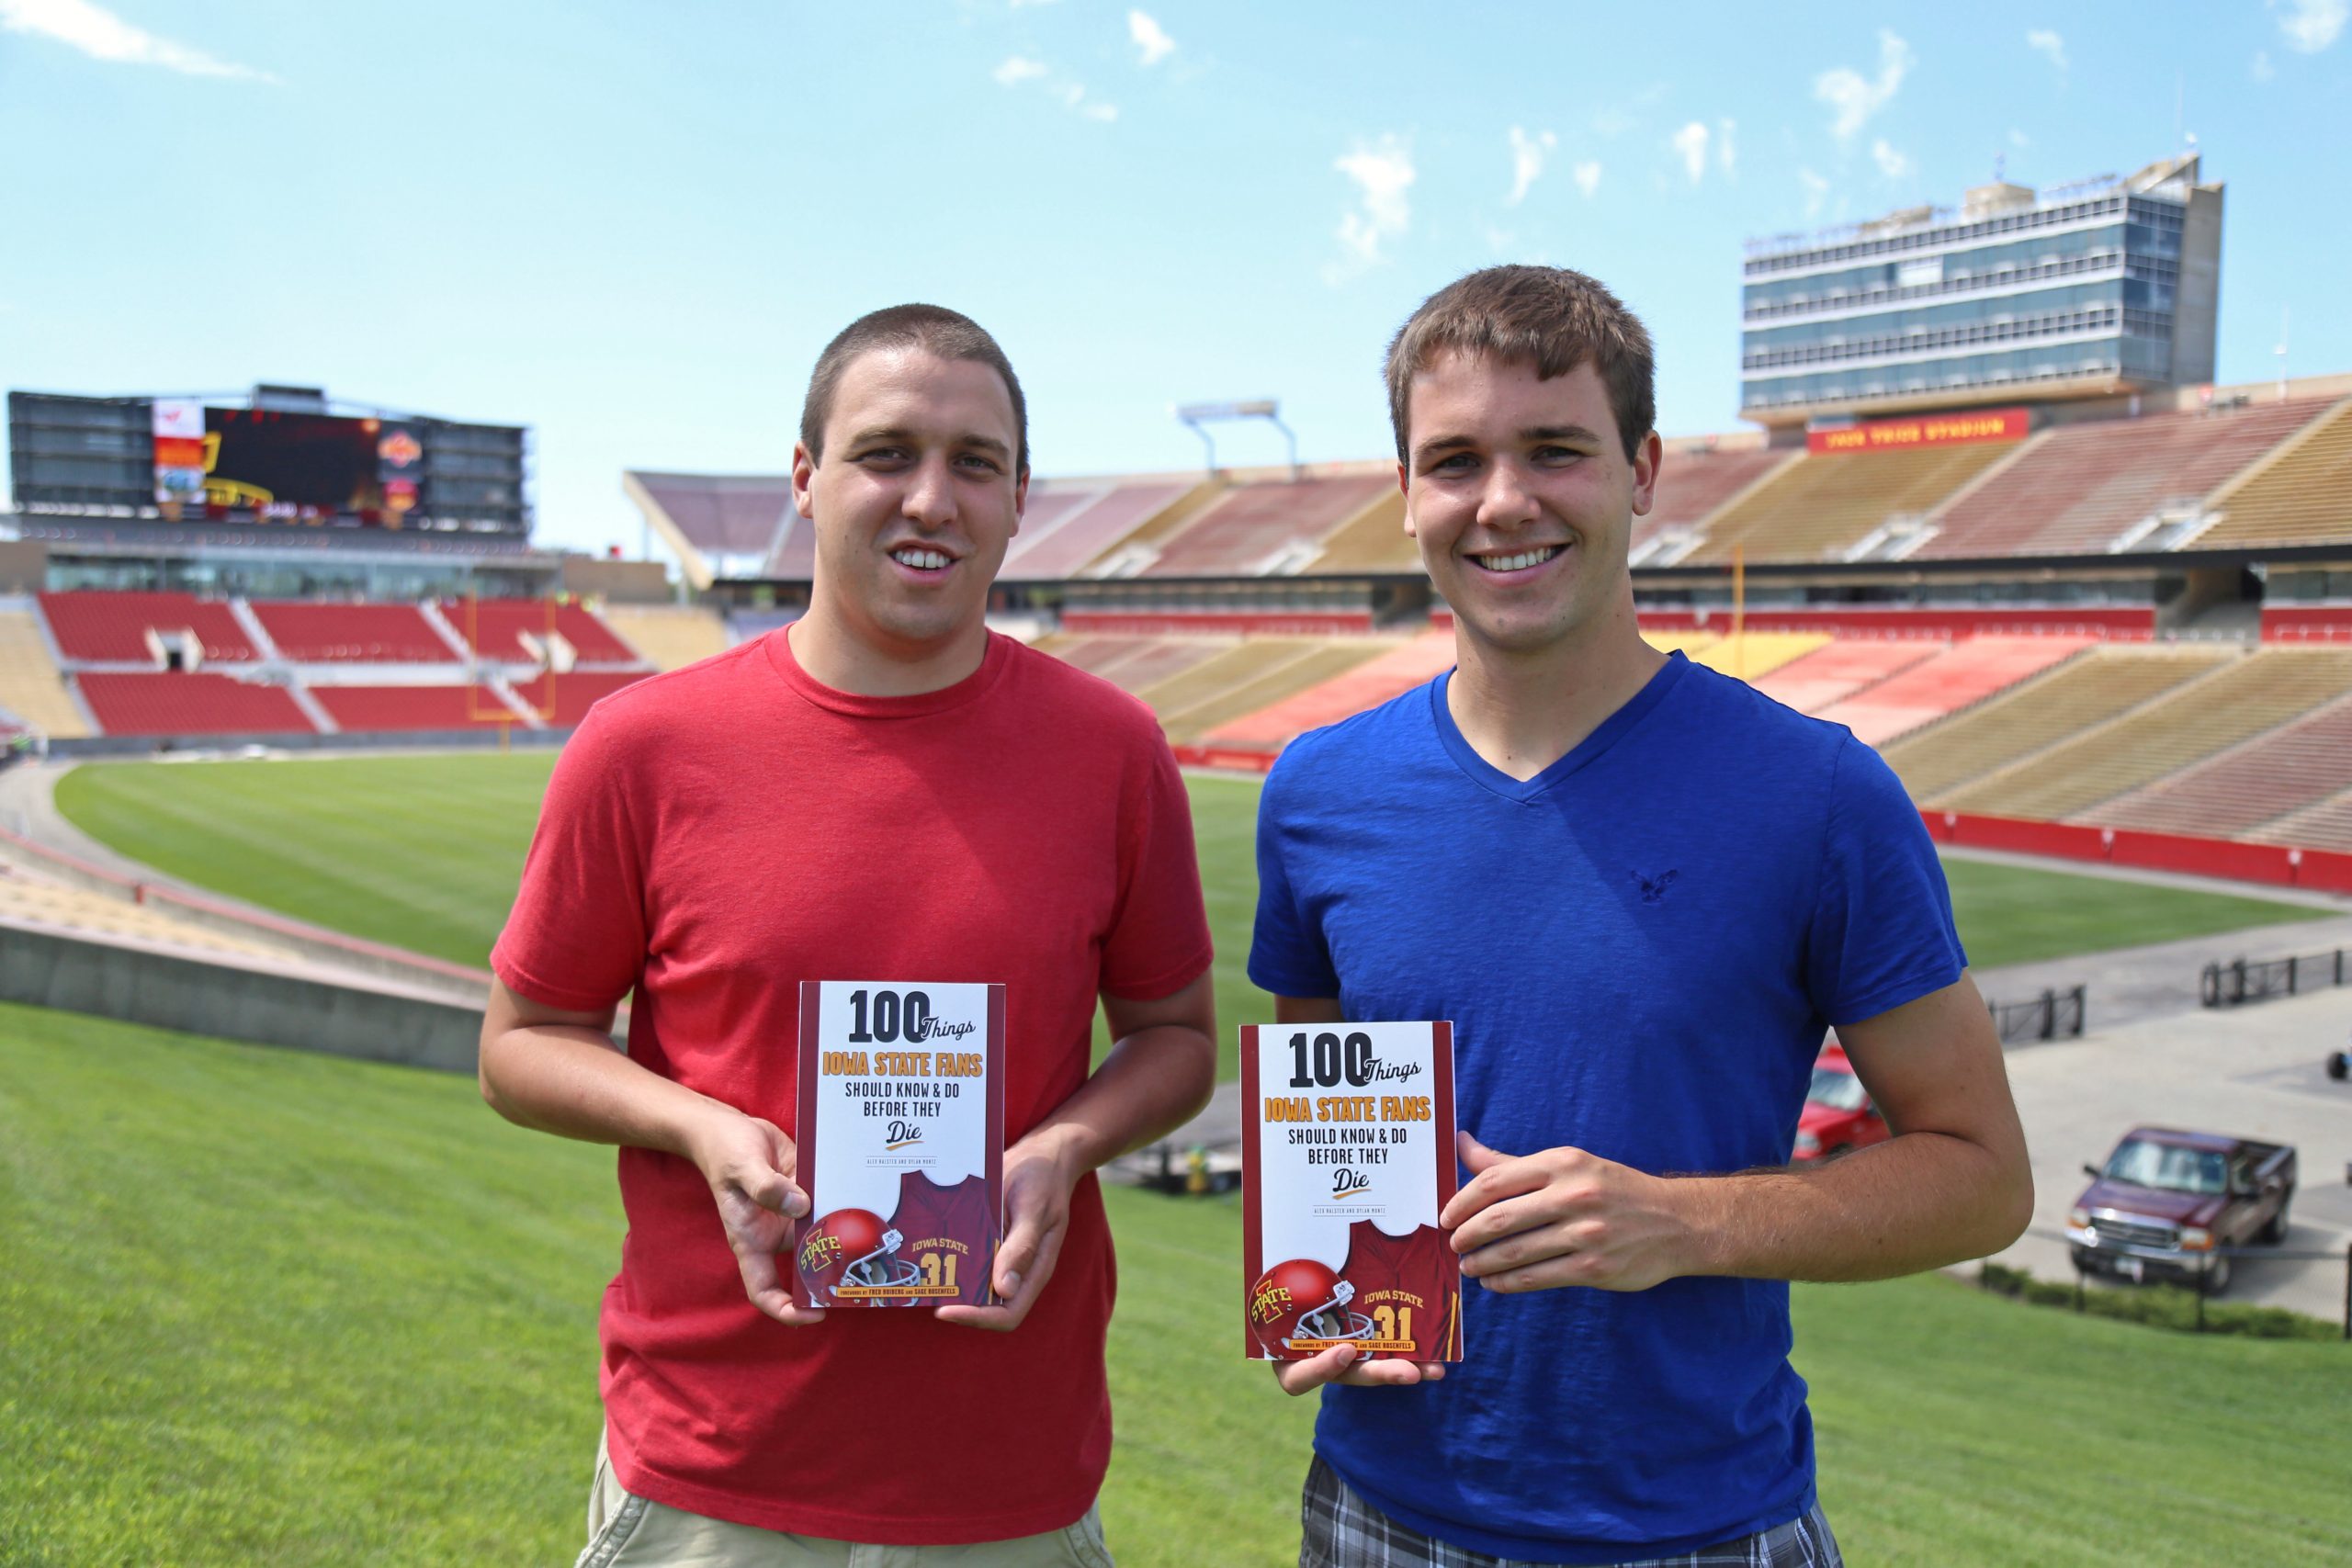 Alex Halsted, ‘14, who covers ISU athletics for the Scout Media Network, and Dylan Montz, ‘14, sports reporter for the Cedar Rapid Gazette, co-authored “100 Things Iowa State Fans Should Know & Do Before They Die.” The book was released last September and makes a perfect gift for any Cyclones fan. It can be purchased through Amazon. Photo by Matt Wettengel